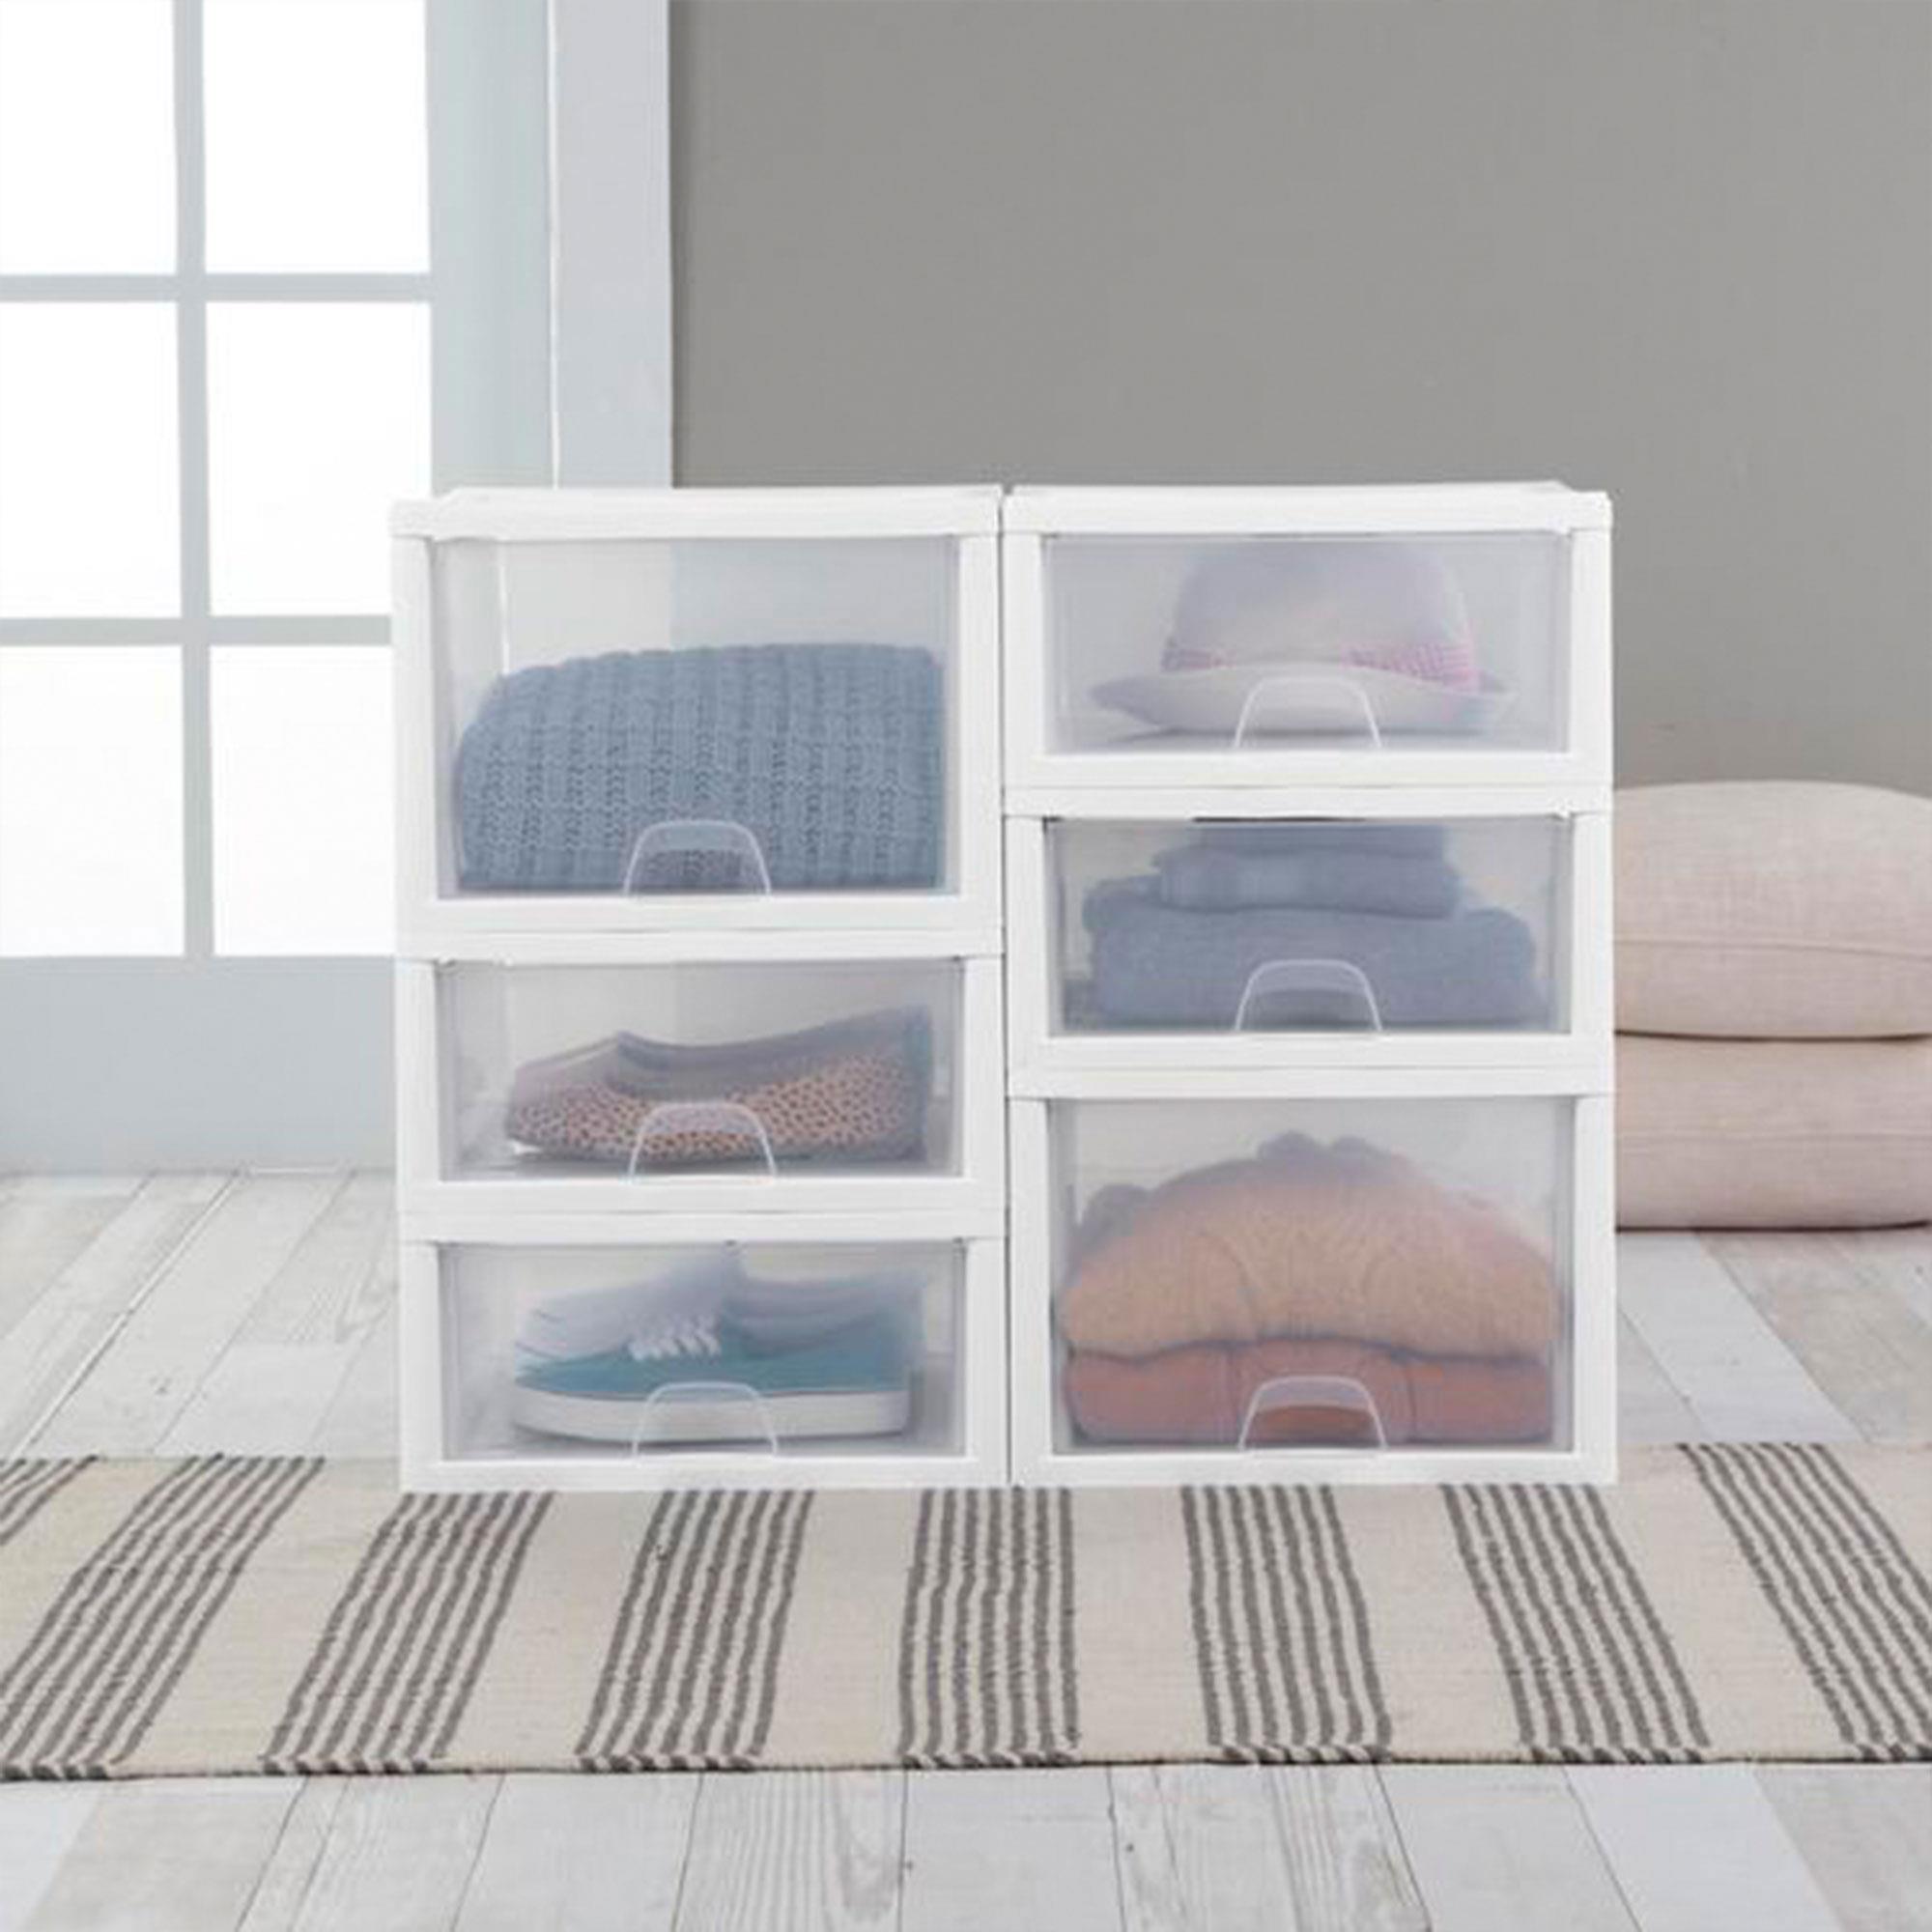 Modular laboratory organizer, stackable drawer from Cole-Parmer